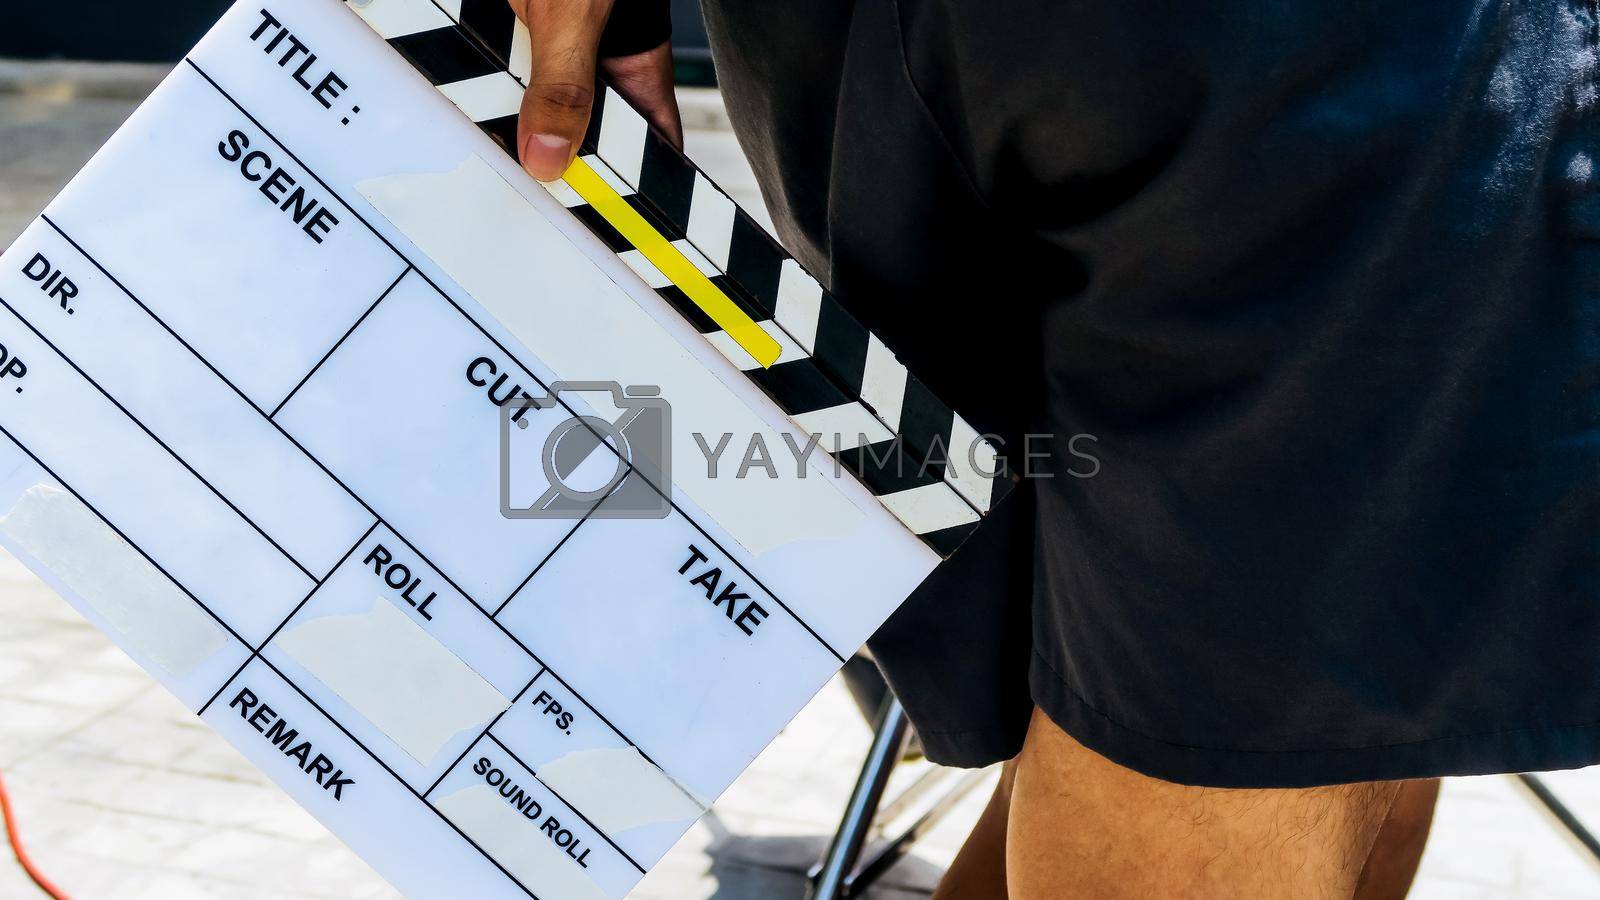 Royalty free image of film crew production set by ponsulak